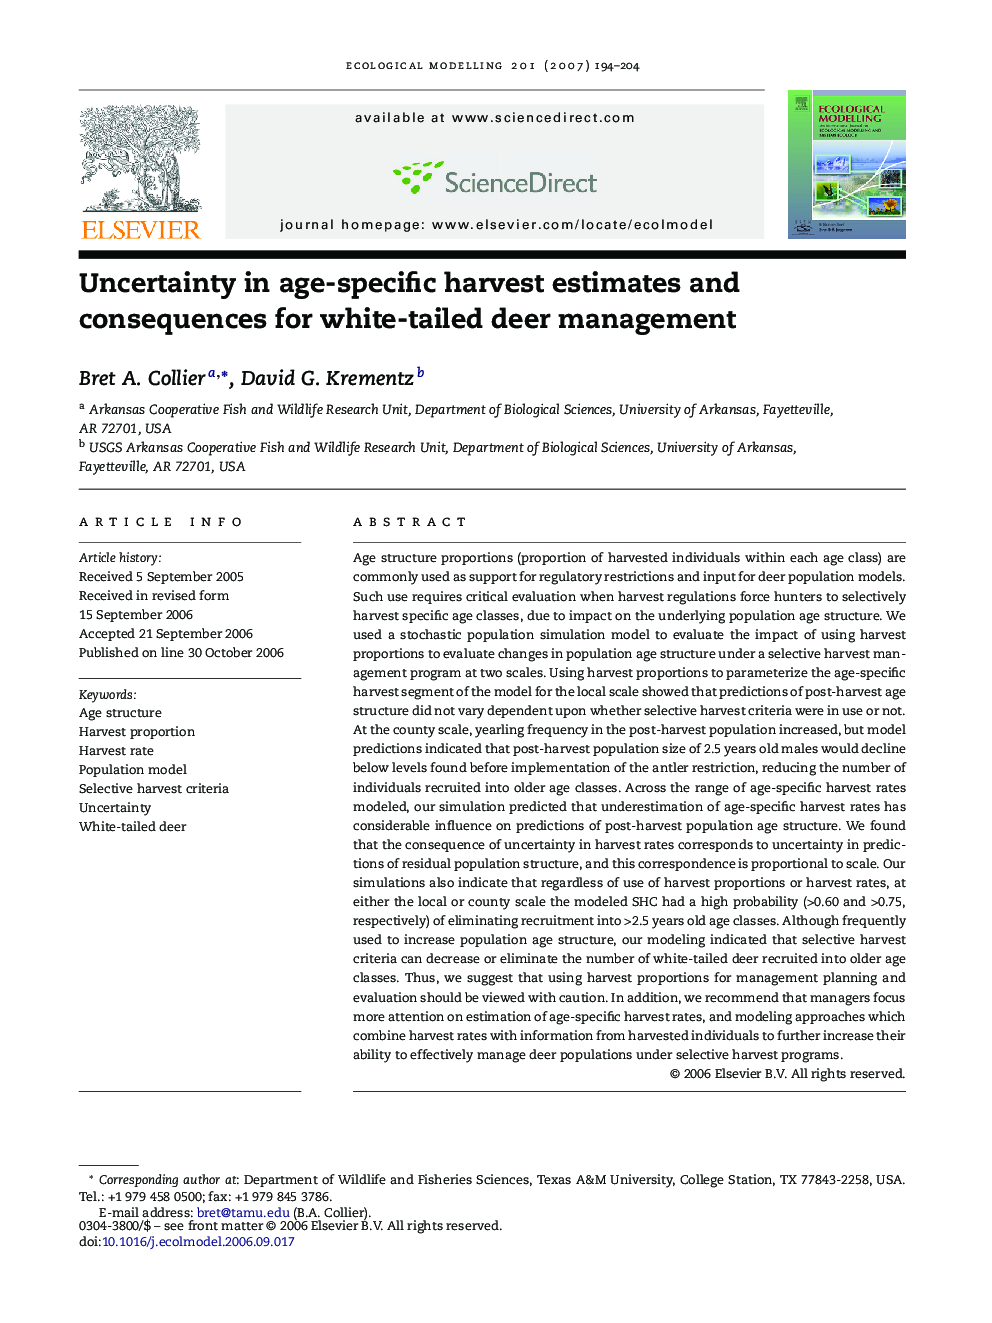 Uncertainty in age-specific harvest estimates and consequences for white-tailed deer management